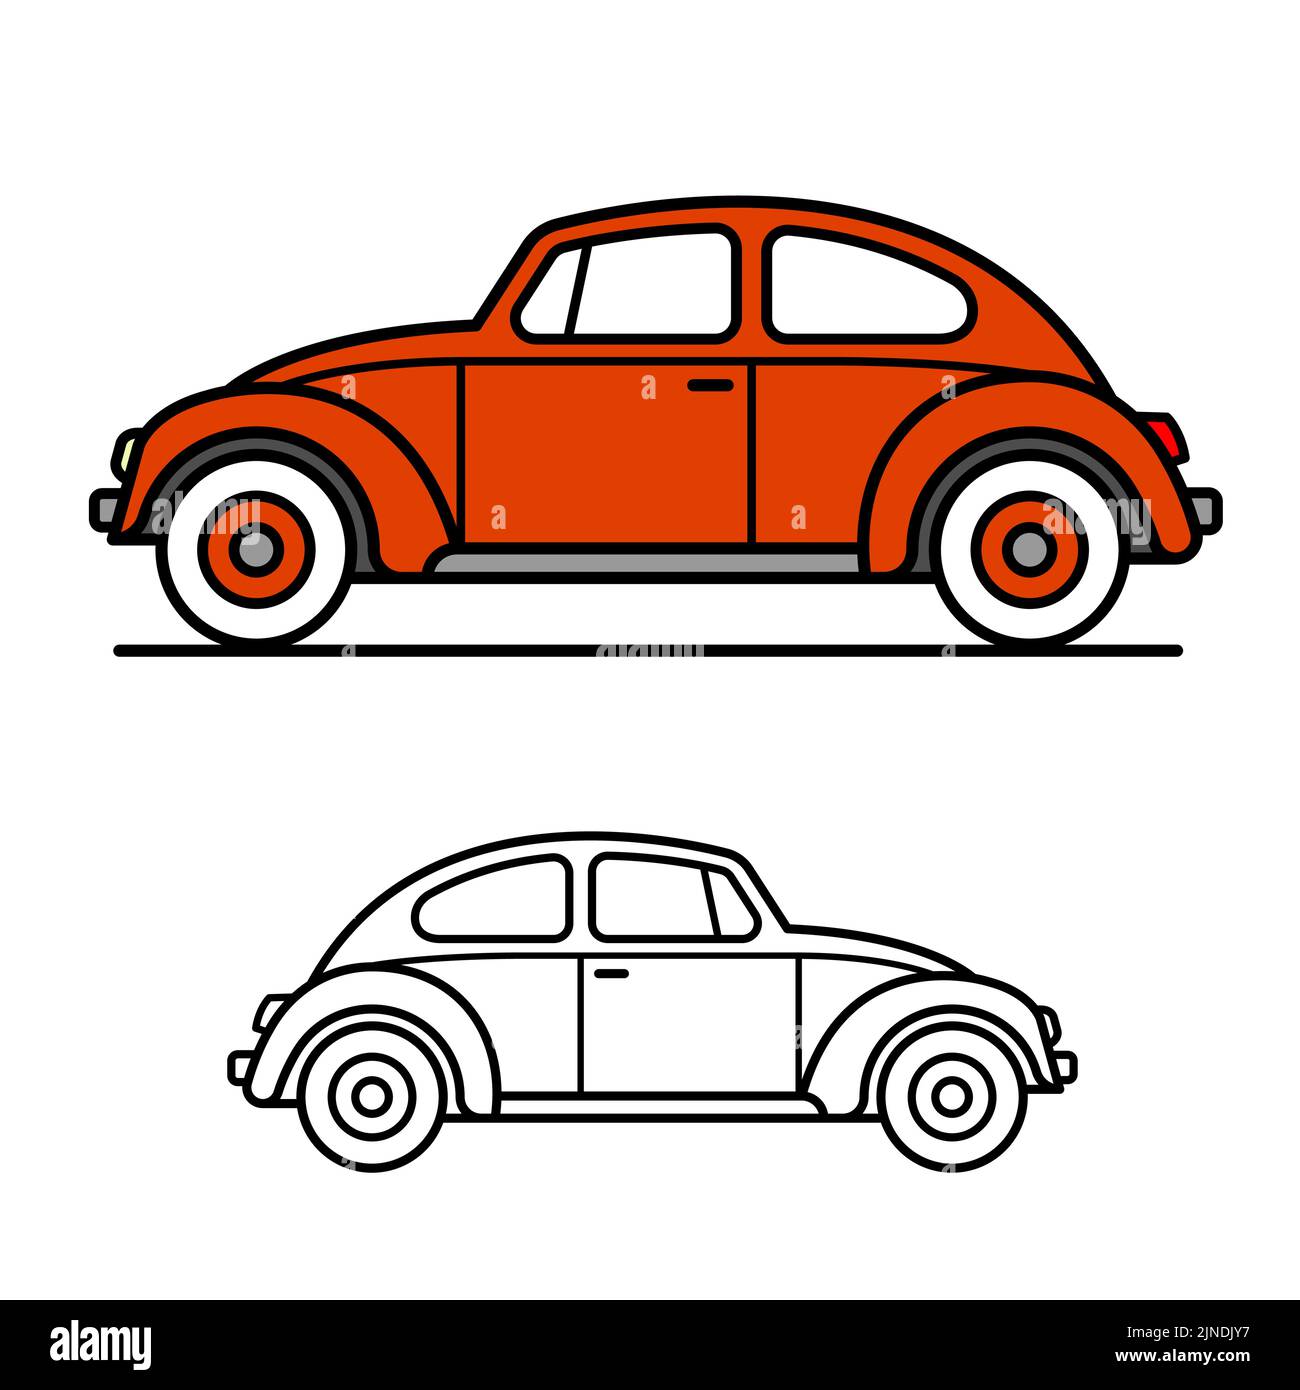 Black and white volkswagen beetle Stock Vector Images - Alamy